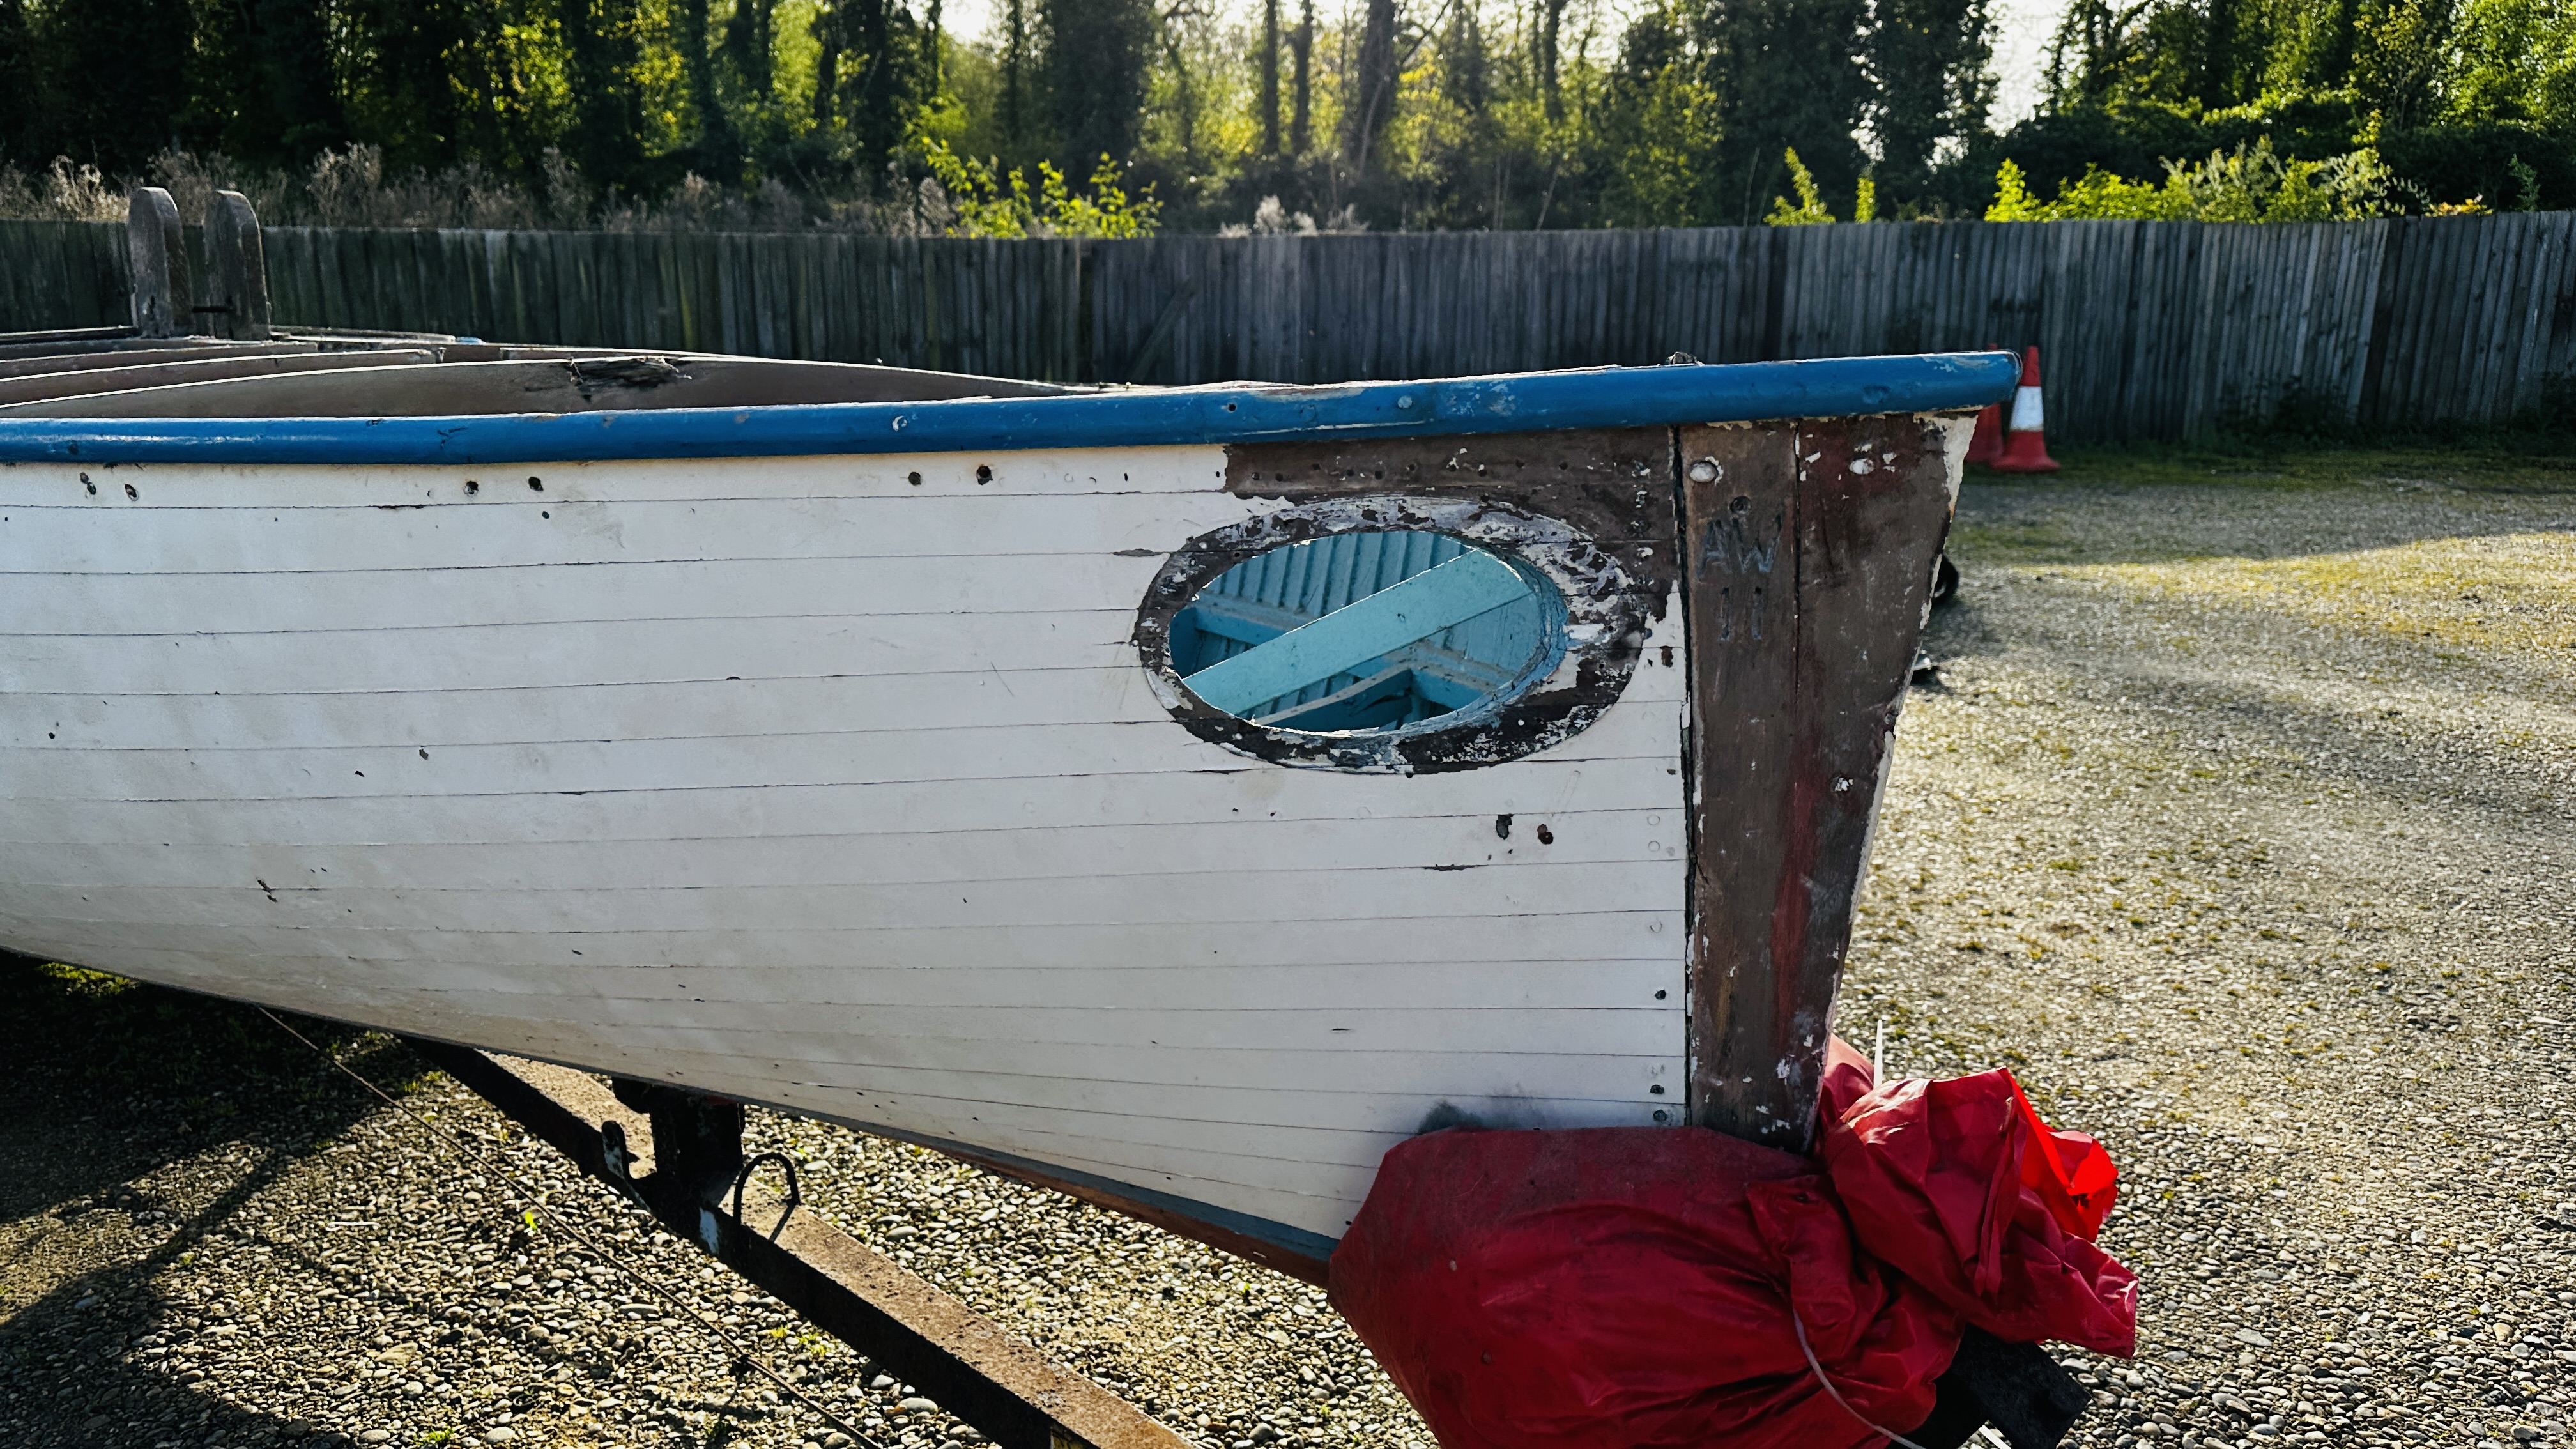 A WW2 UFFA FOX RESCUE BOAT BELIEVED TO BE BUILT BY TAYLOR WOODROW, STAMPED AW11, 1 OF 402 MADE, - Image 2 of 56